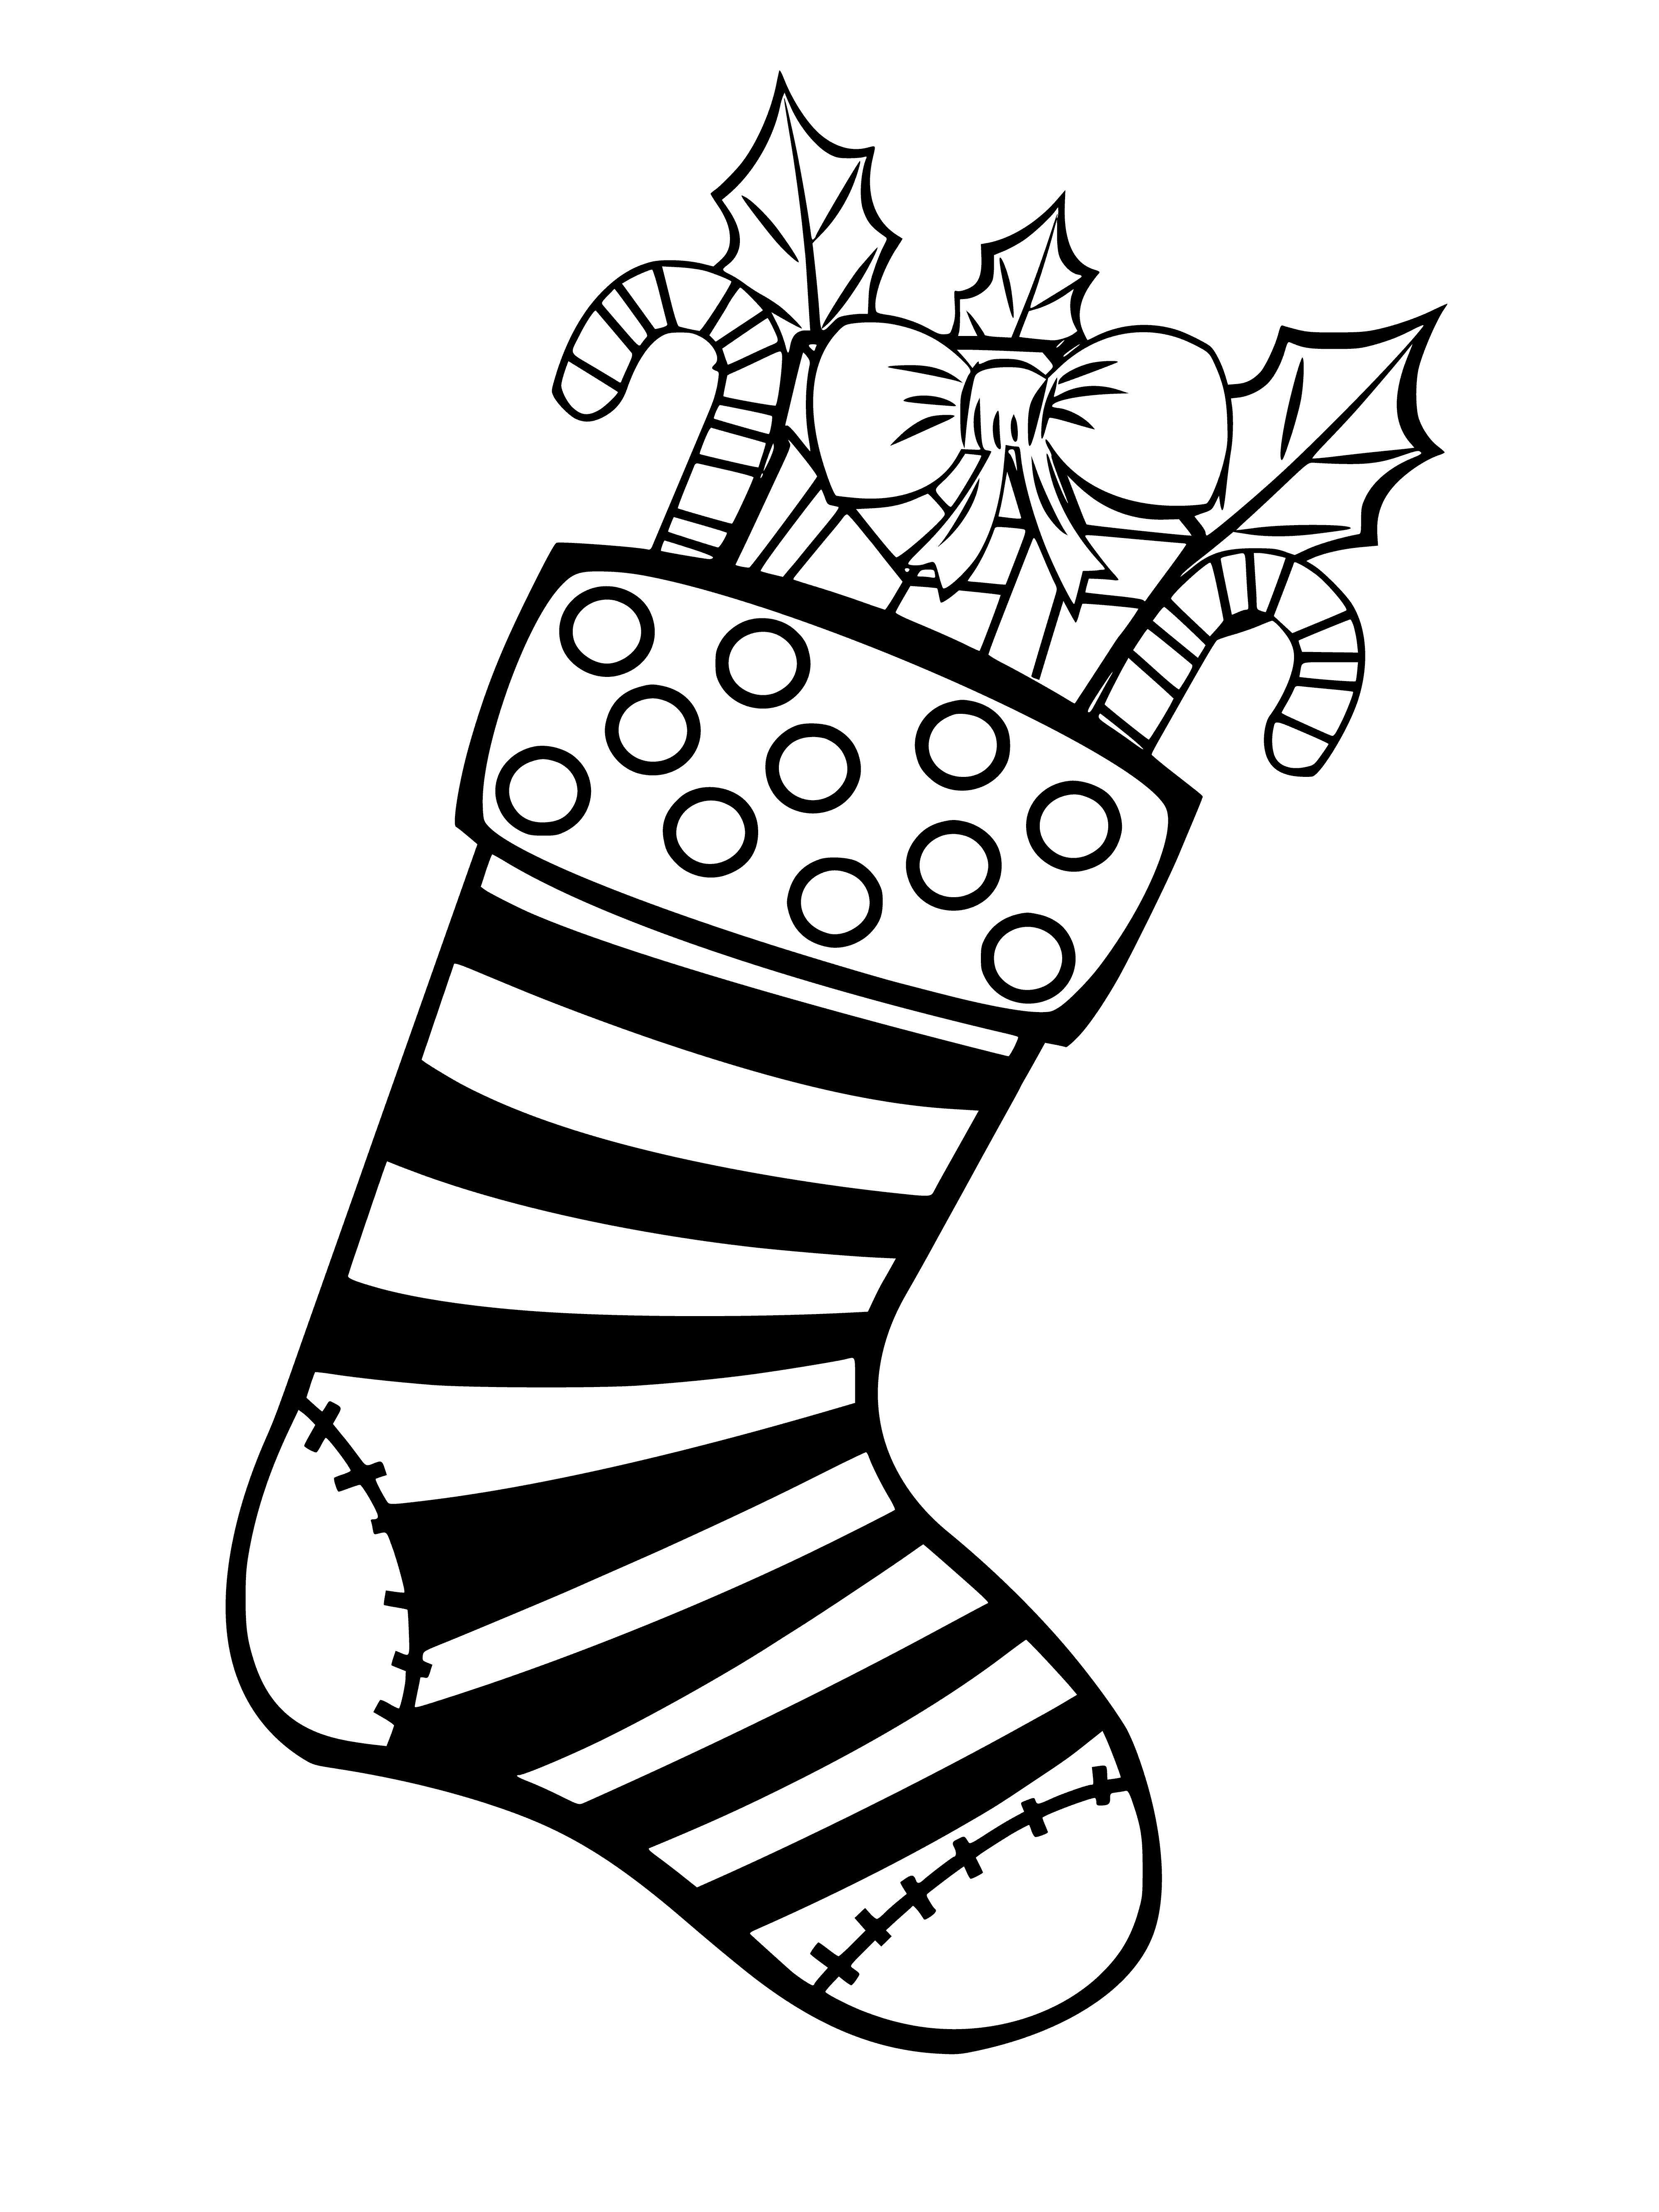 coloring page: Cute red Christmas socks with snowflakes - perfect for gift-giving this holiday season! #ChristmasShopping